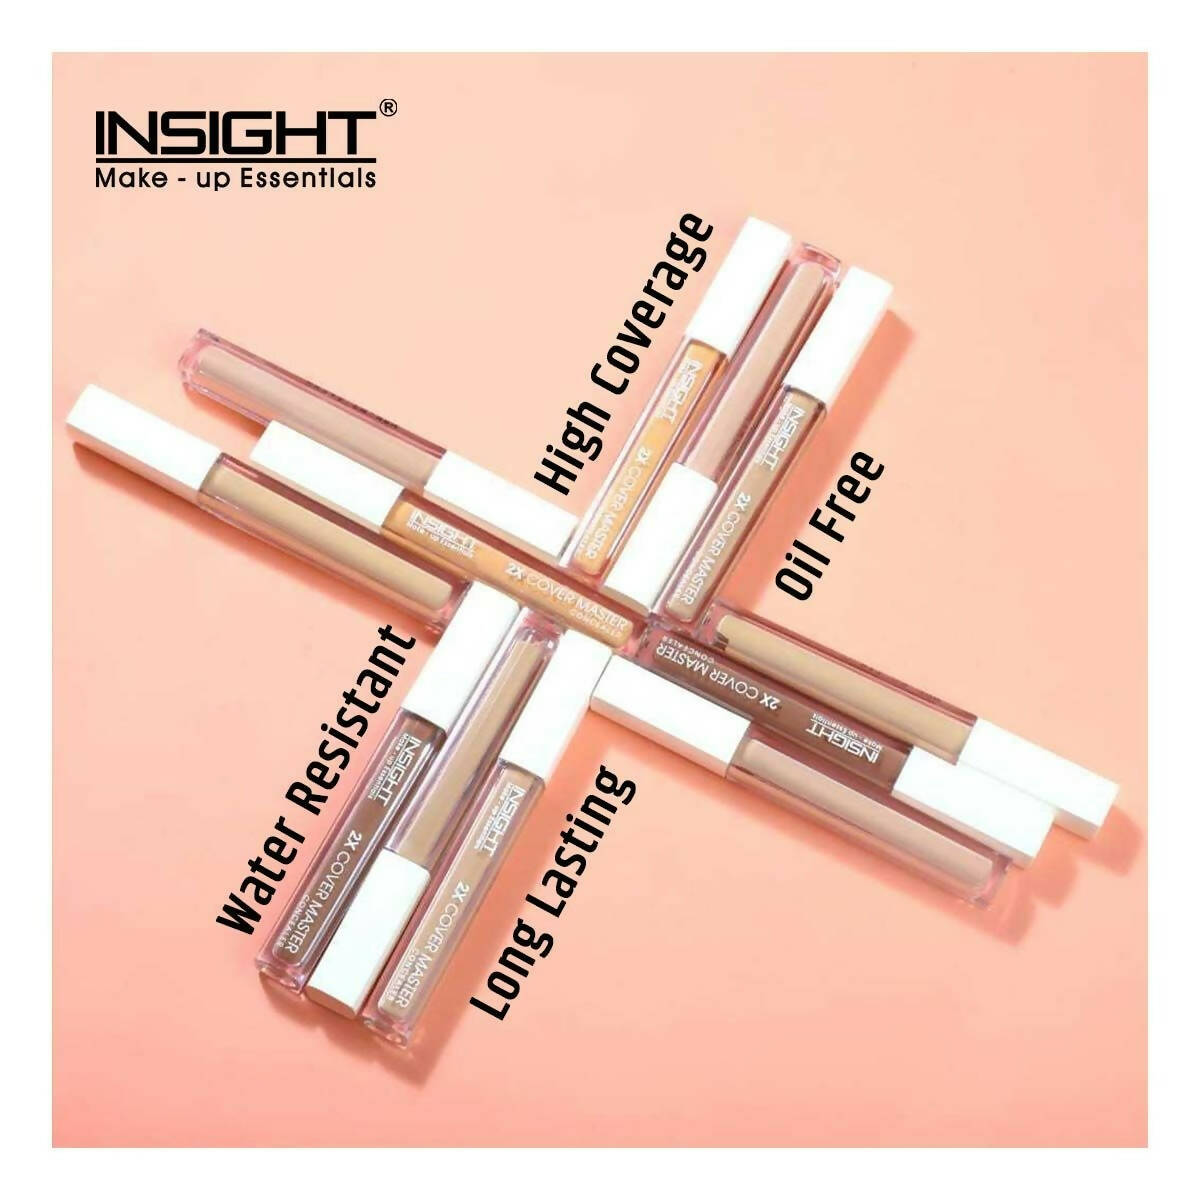 Insight Cosmetics 2X Cover Master Concealer - 03 Golden Sand